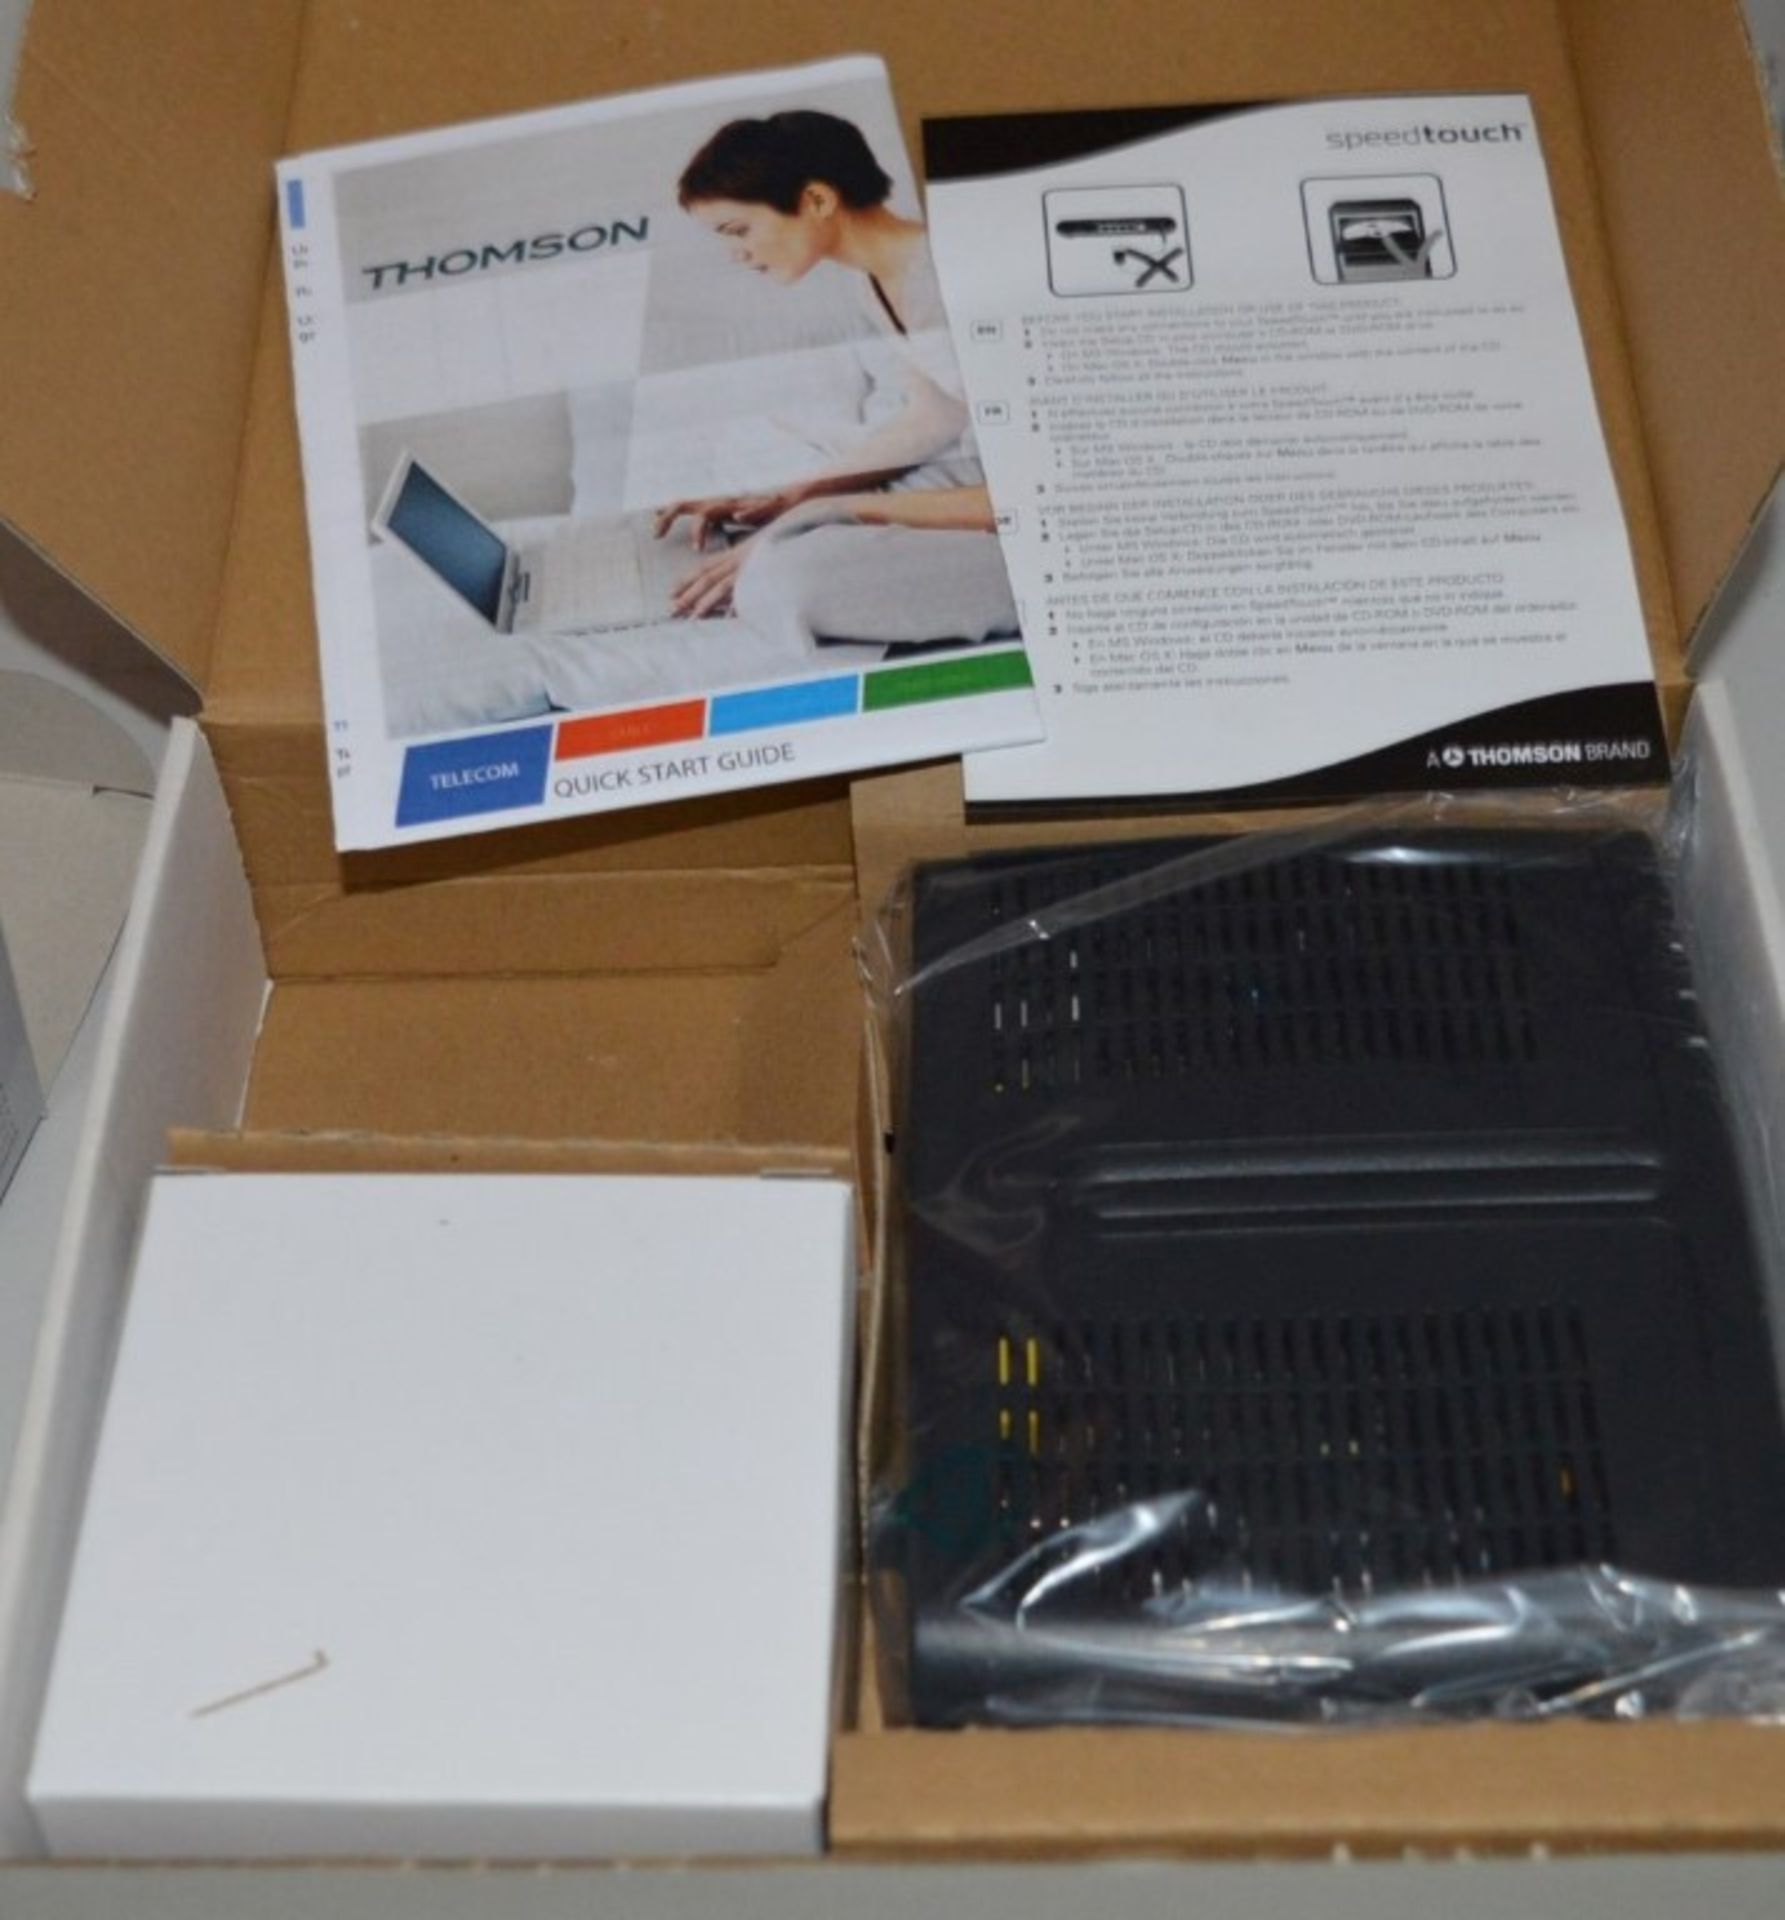 1 x Thompson Speedtouch 546i v6 Multi User ADSL2+ Gateway Router - New Boxed Stock - CL300 - Locatio - Image 2 of 2